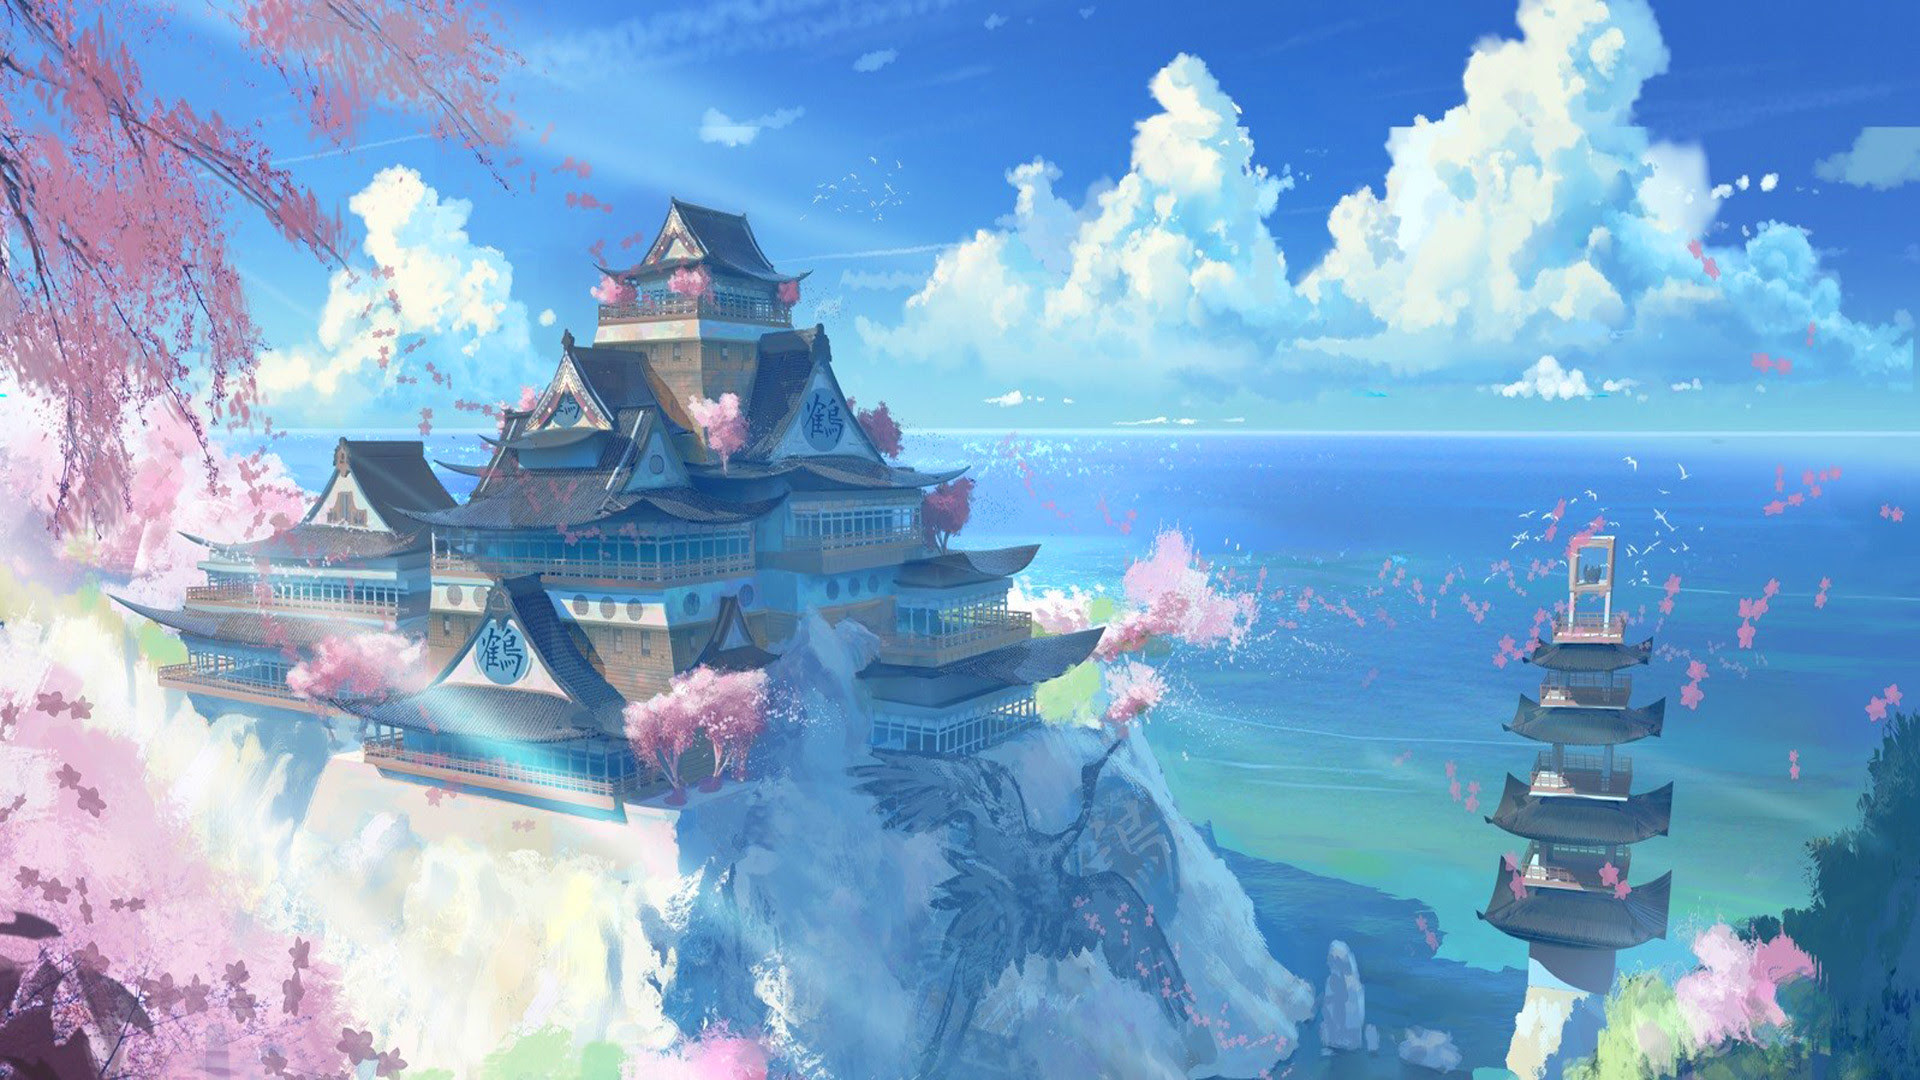 Anime Scenery Wallpaper 48+ images